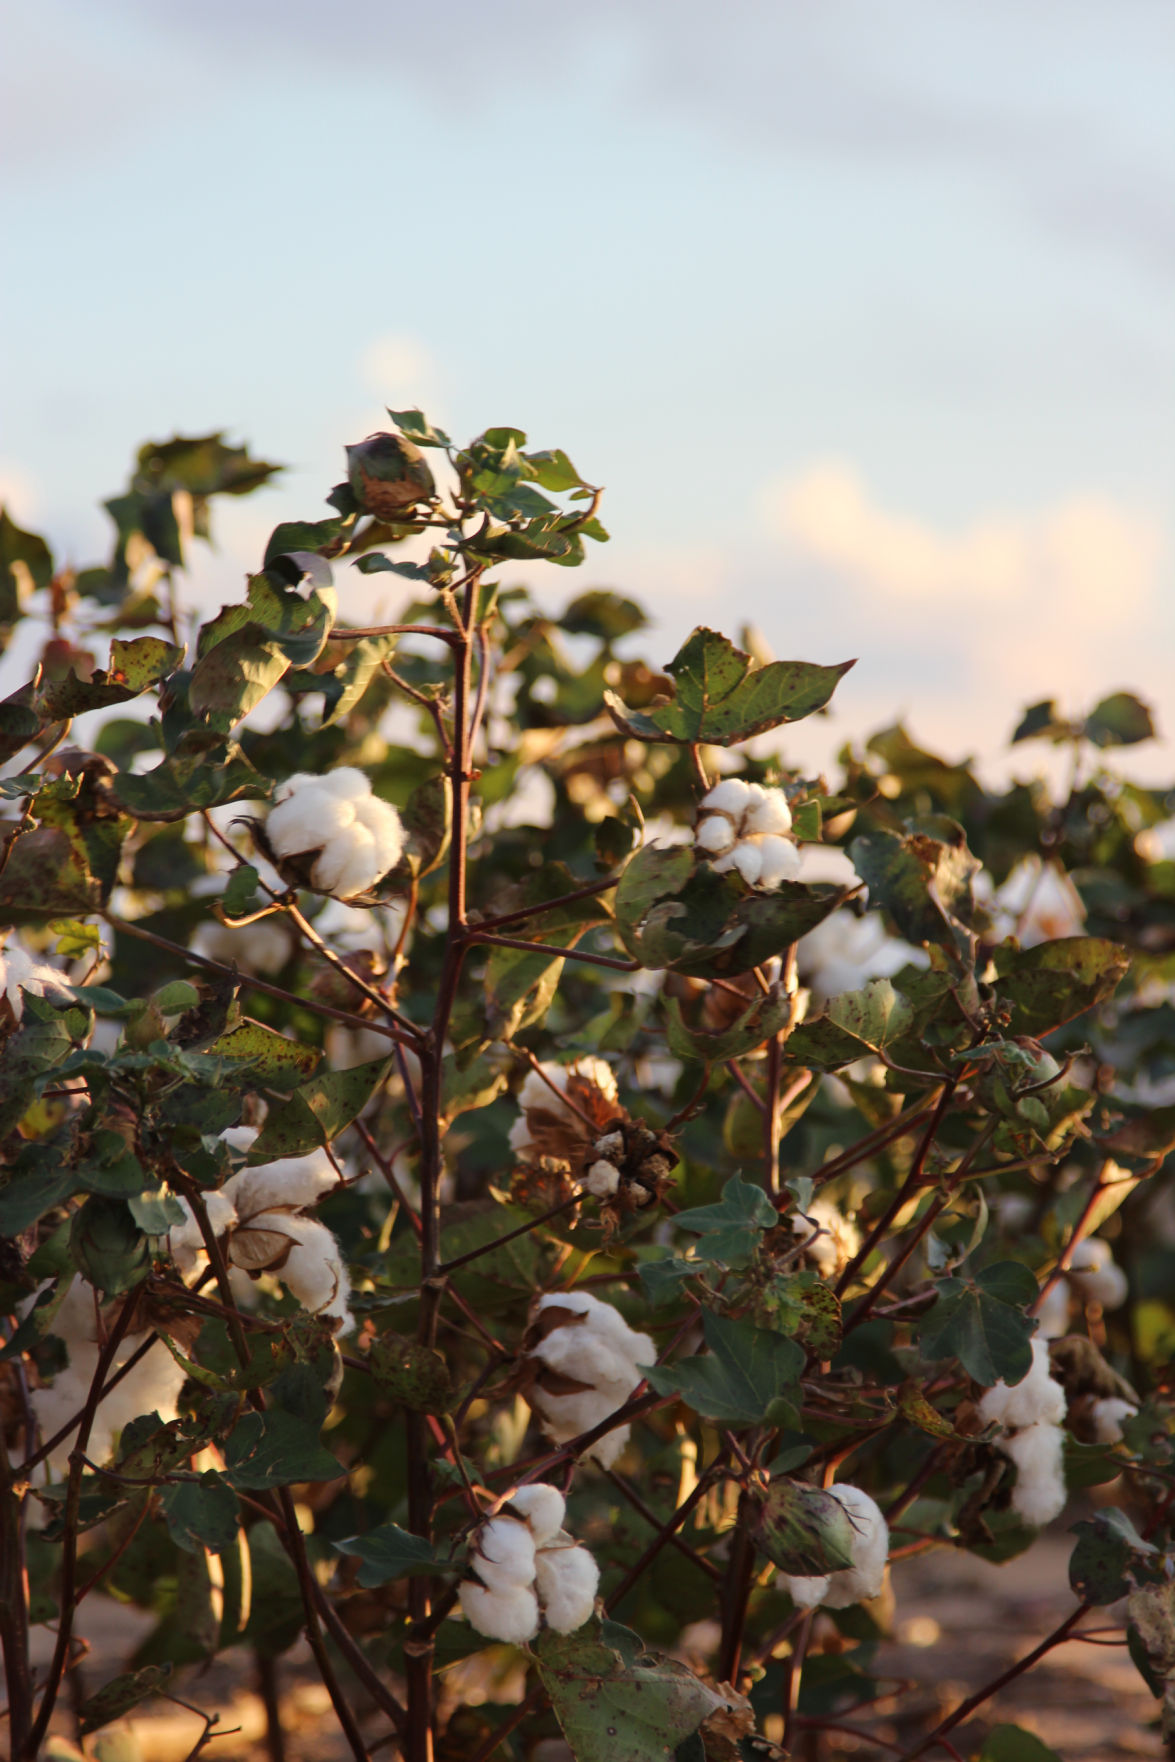 ICAC: Global cotton consumption to increase